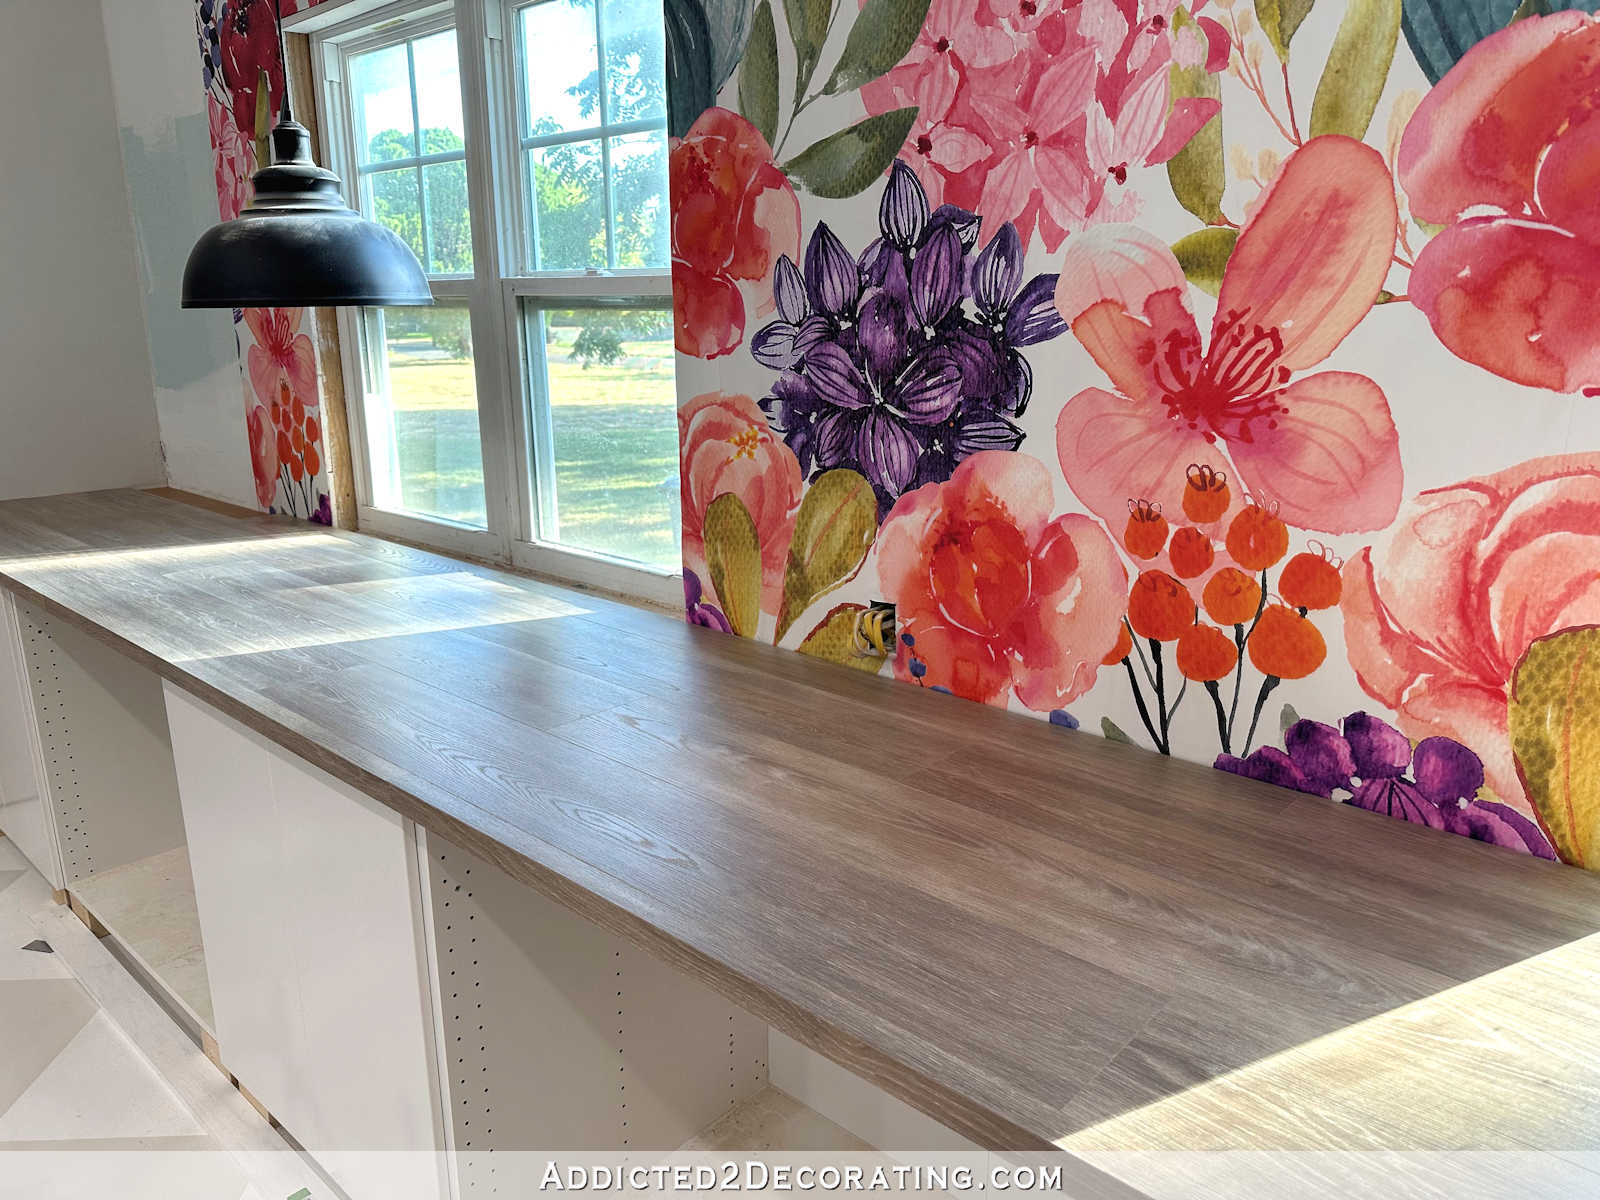 Long DIY Countertop Made With Laminate Flooring (How To Make A 20-Foot-Long Countertop For Around $300)